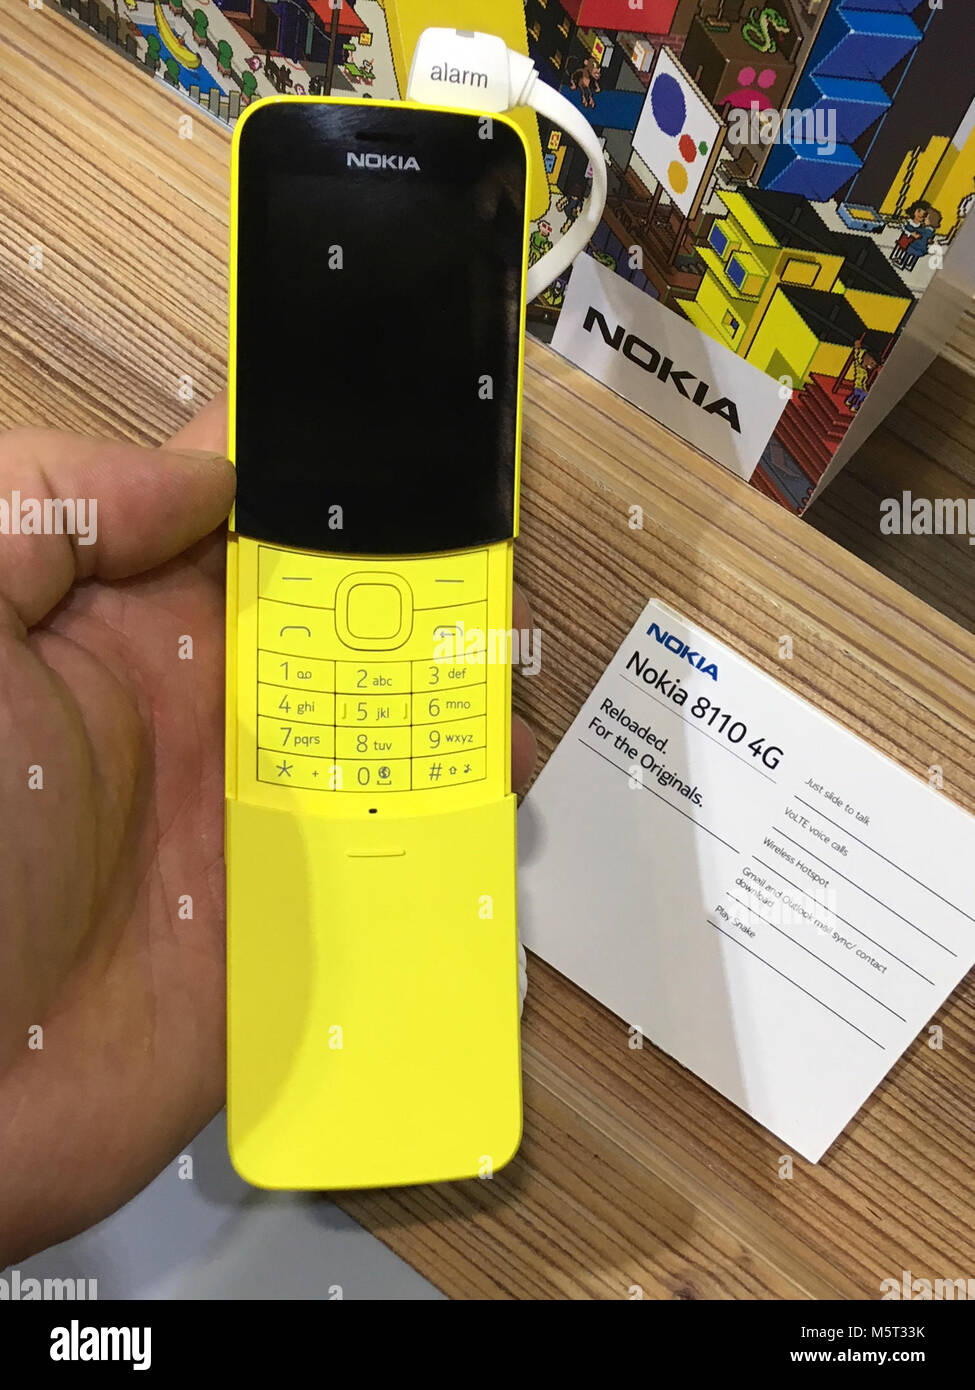 Barcelona, Spain. 26th Feb, 2018. A mobile phone Nokia 8110 in Banana Yellow color by HMD Global company is seen during the 2018 Mobile World Congress in Barcelona, Spain, on February 26, 2018. Credit: Jan Sadilek/CTK Photo/Alamy Live News Stock Photo